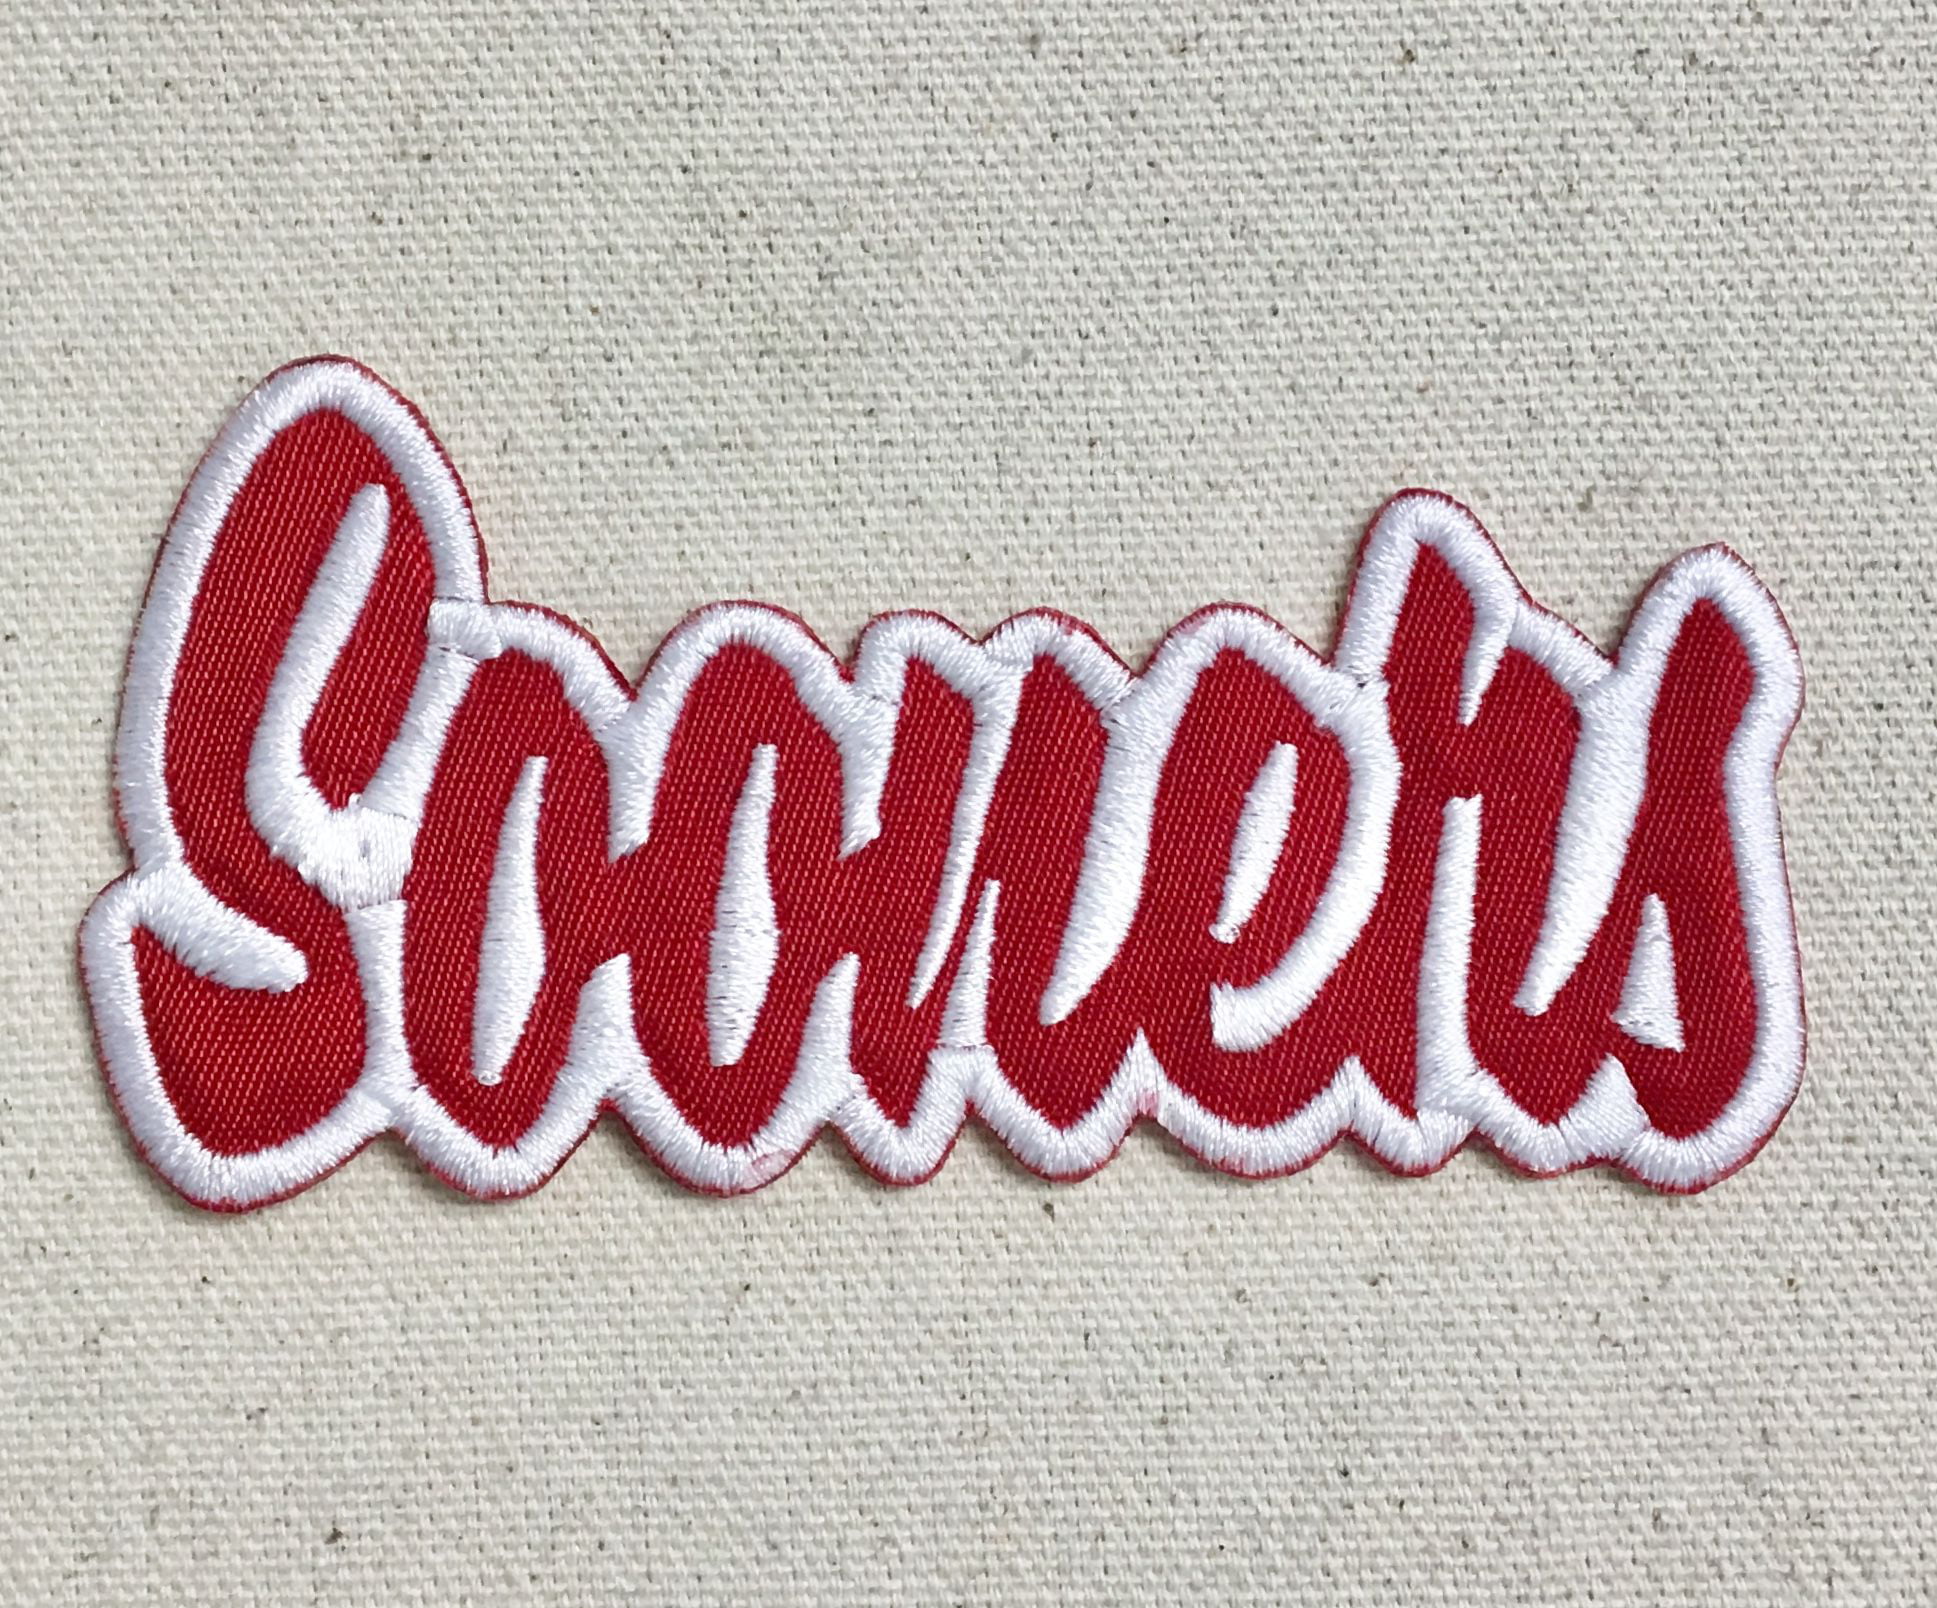 Cardinals - Red/Black - Team Mascot - Words/Names - Iron on  Applique/Embroidered Patch